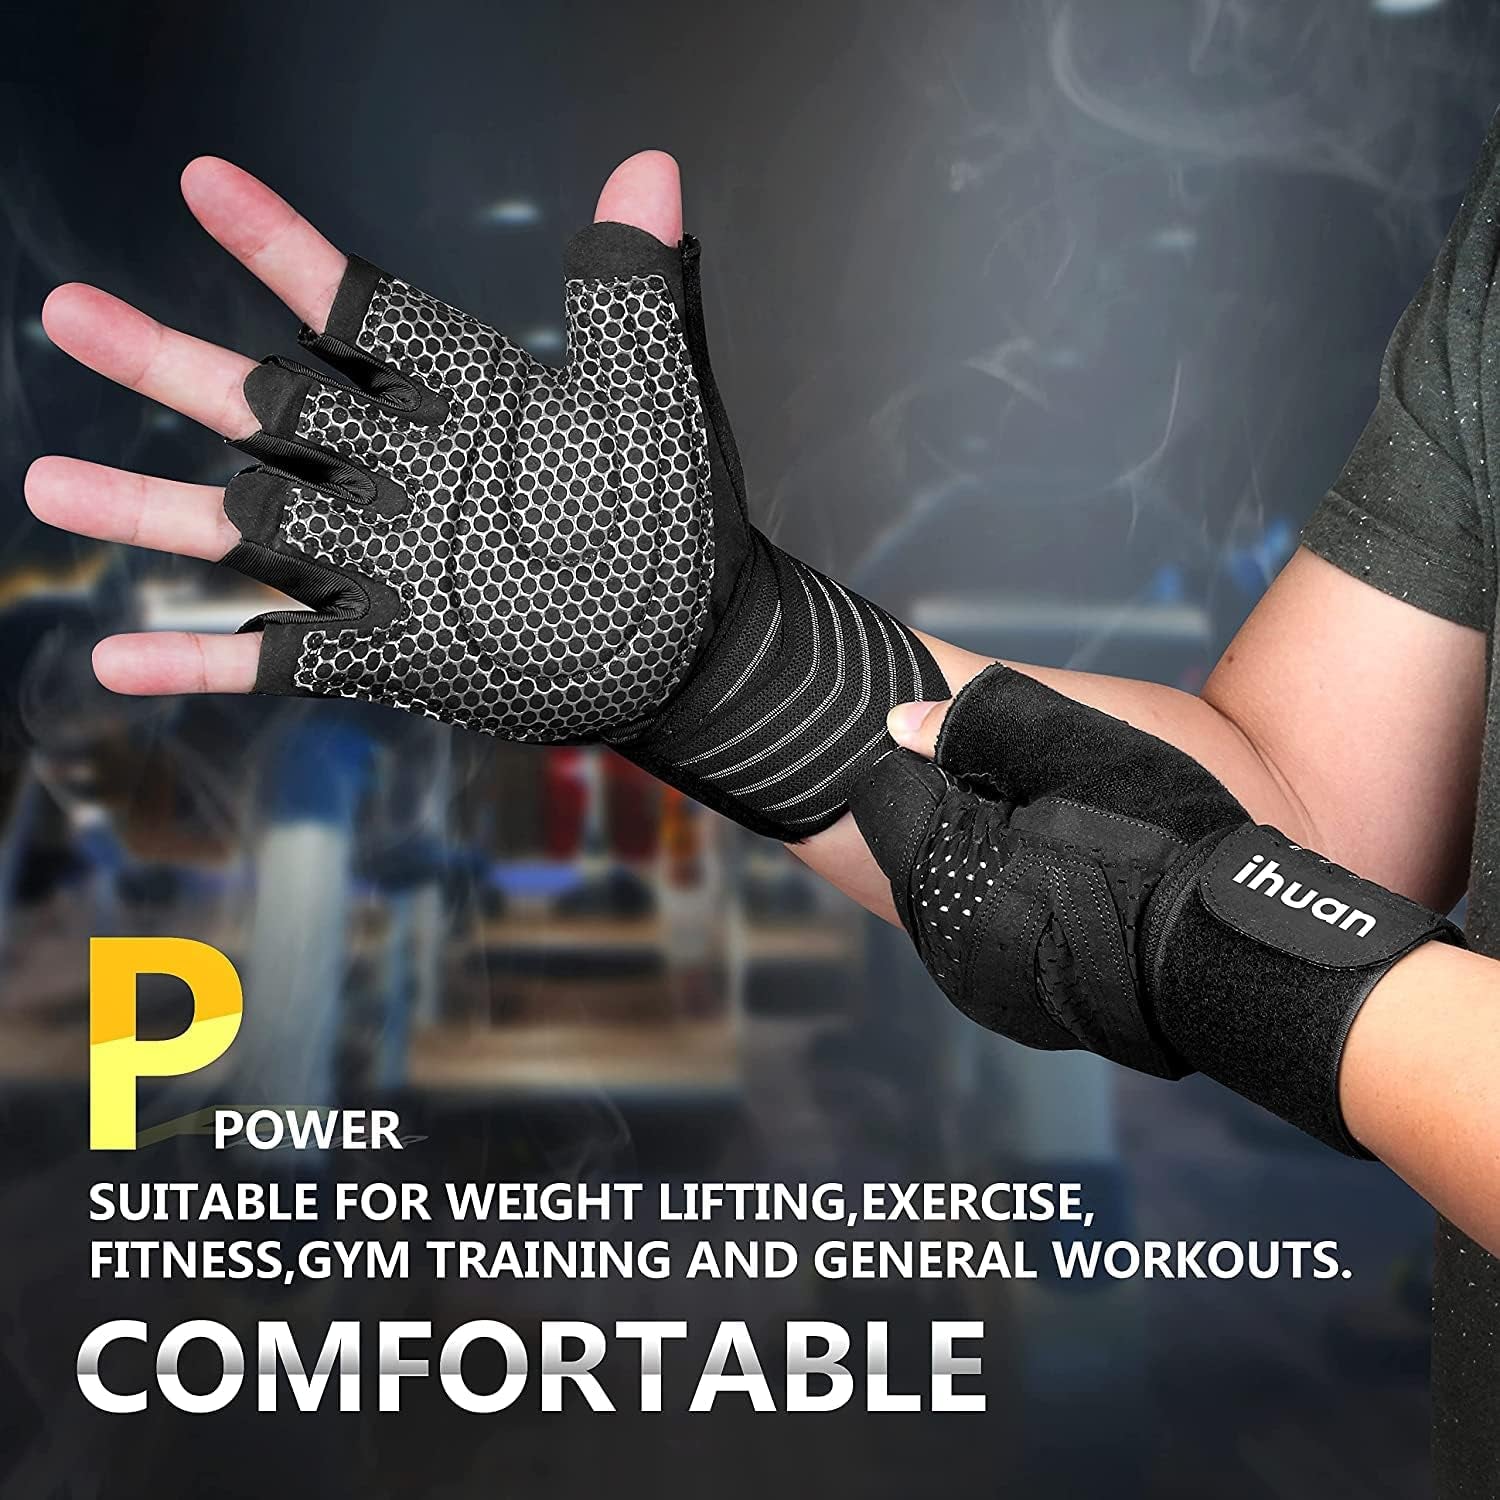 Ventilated Weight Lifting Gym Workout Gloves with Wrist Wrap Support for Men & Women, Full Palm Protection, for Weightlifting, Training, Fitness, Hanging, Pull Ups